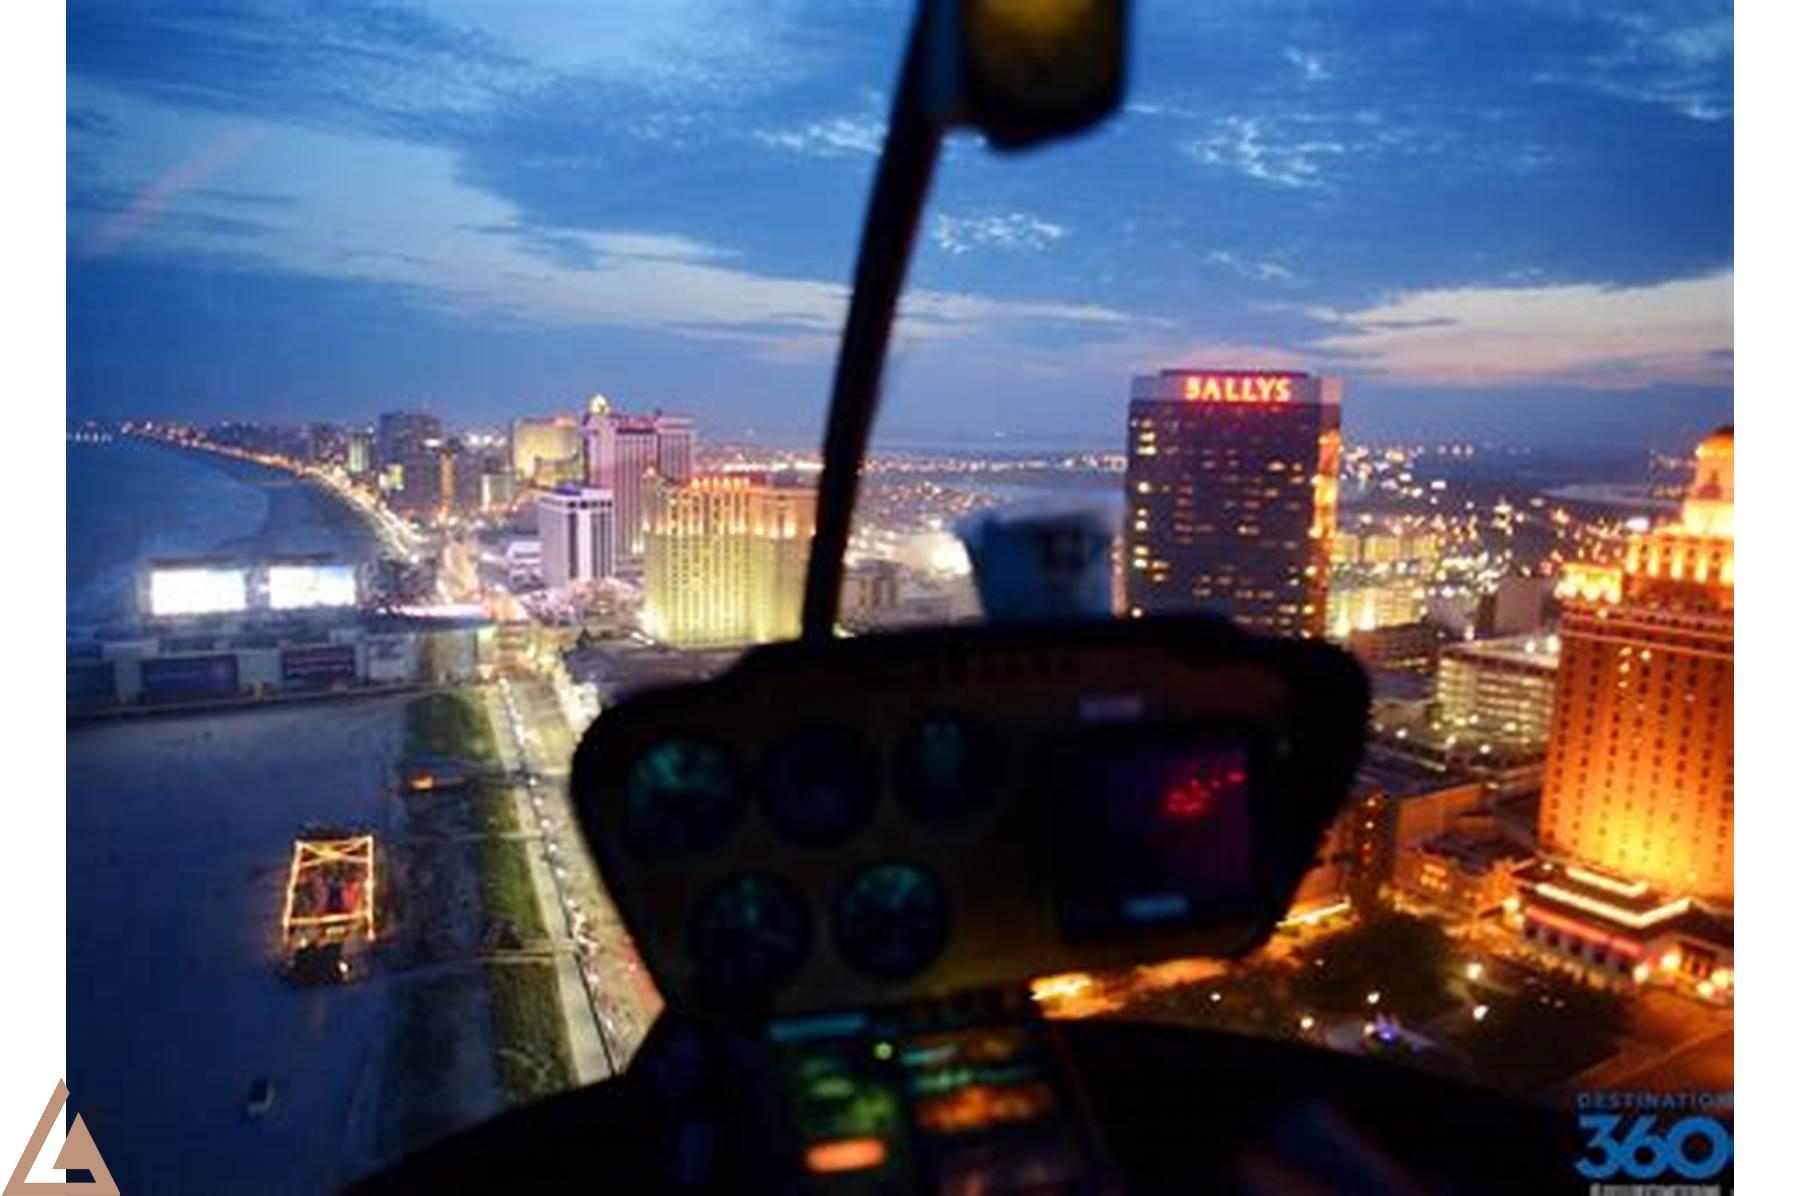 helicopter-nyc-to-atlantic-city-price,Factors Affecting Helicopter NYC to Atlantic City Price,thqFactorsAffectingHelicopterNYCtoAtlanticCityPrice